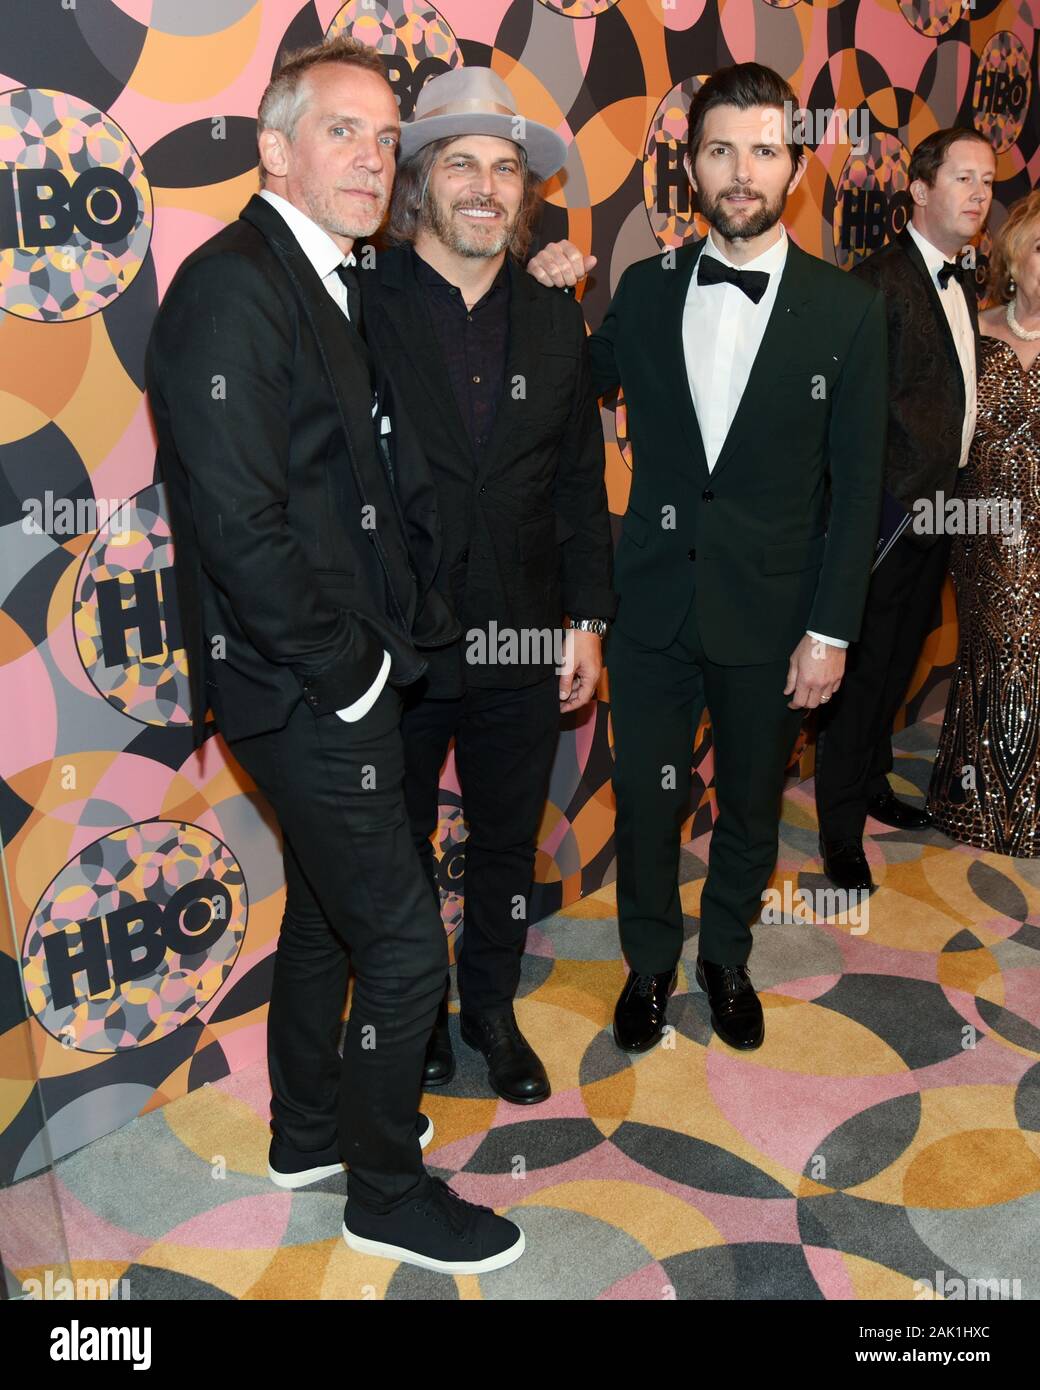 January 5, 2020, Beverly Hills, CA, USA: Jean-Marc VallÃ©e and Adam Scott attends the 2020 HBO Golden Globe Awards After Party held at Circa 55 Restaurant in the Beverly Hilton Hotel. (Credit Image: © Billy Bennight/ZUMA Wire) Stock Photo